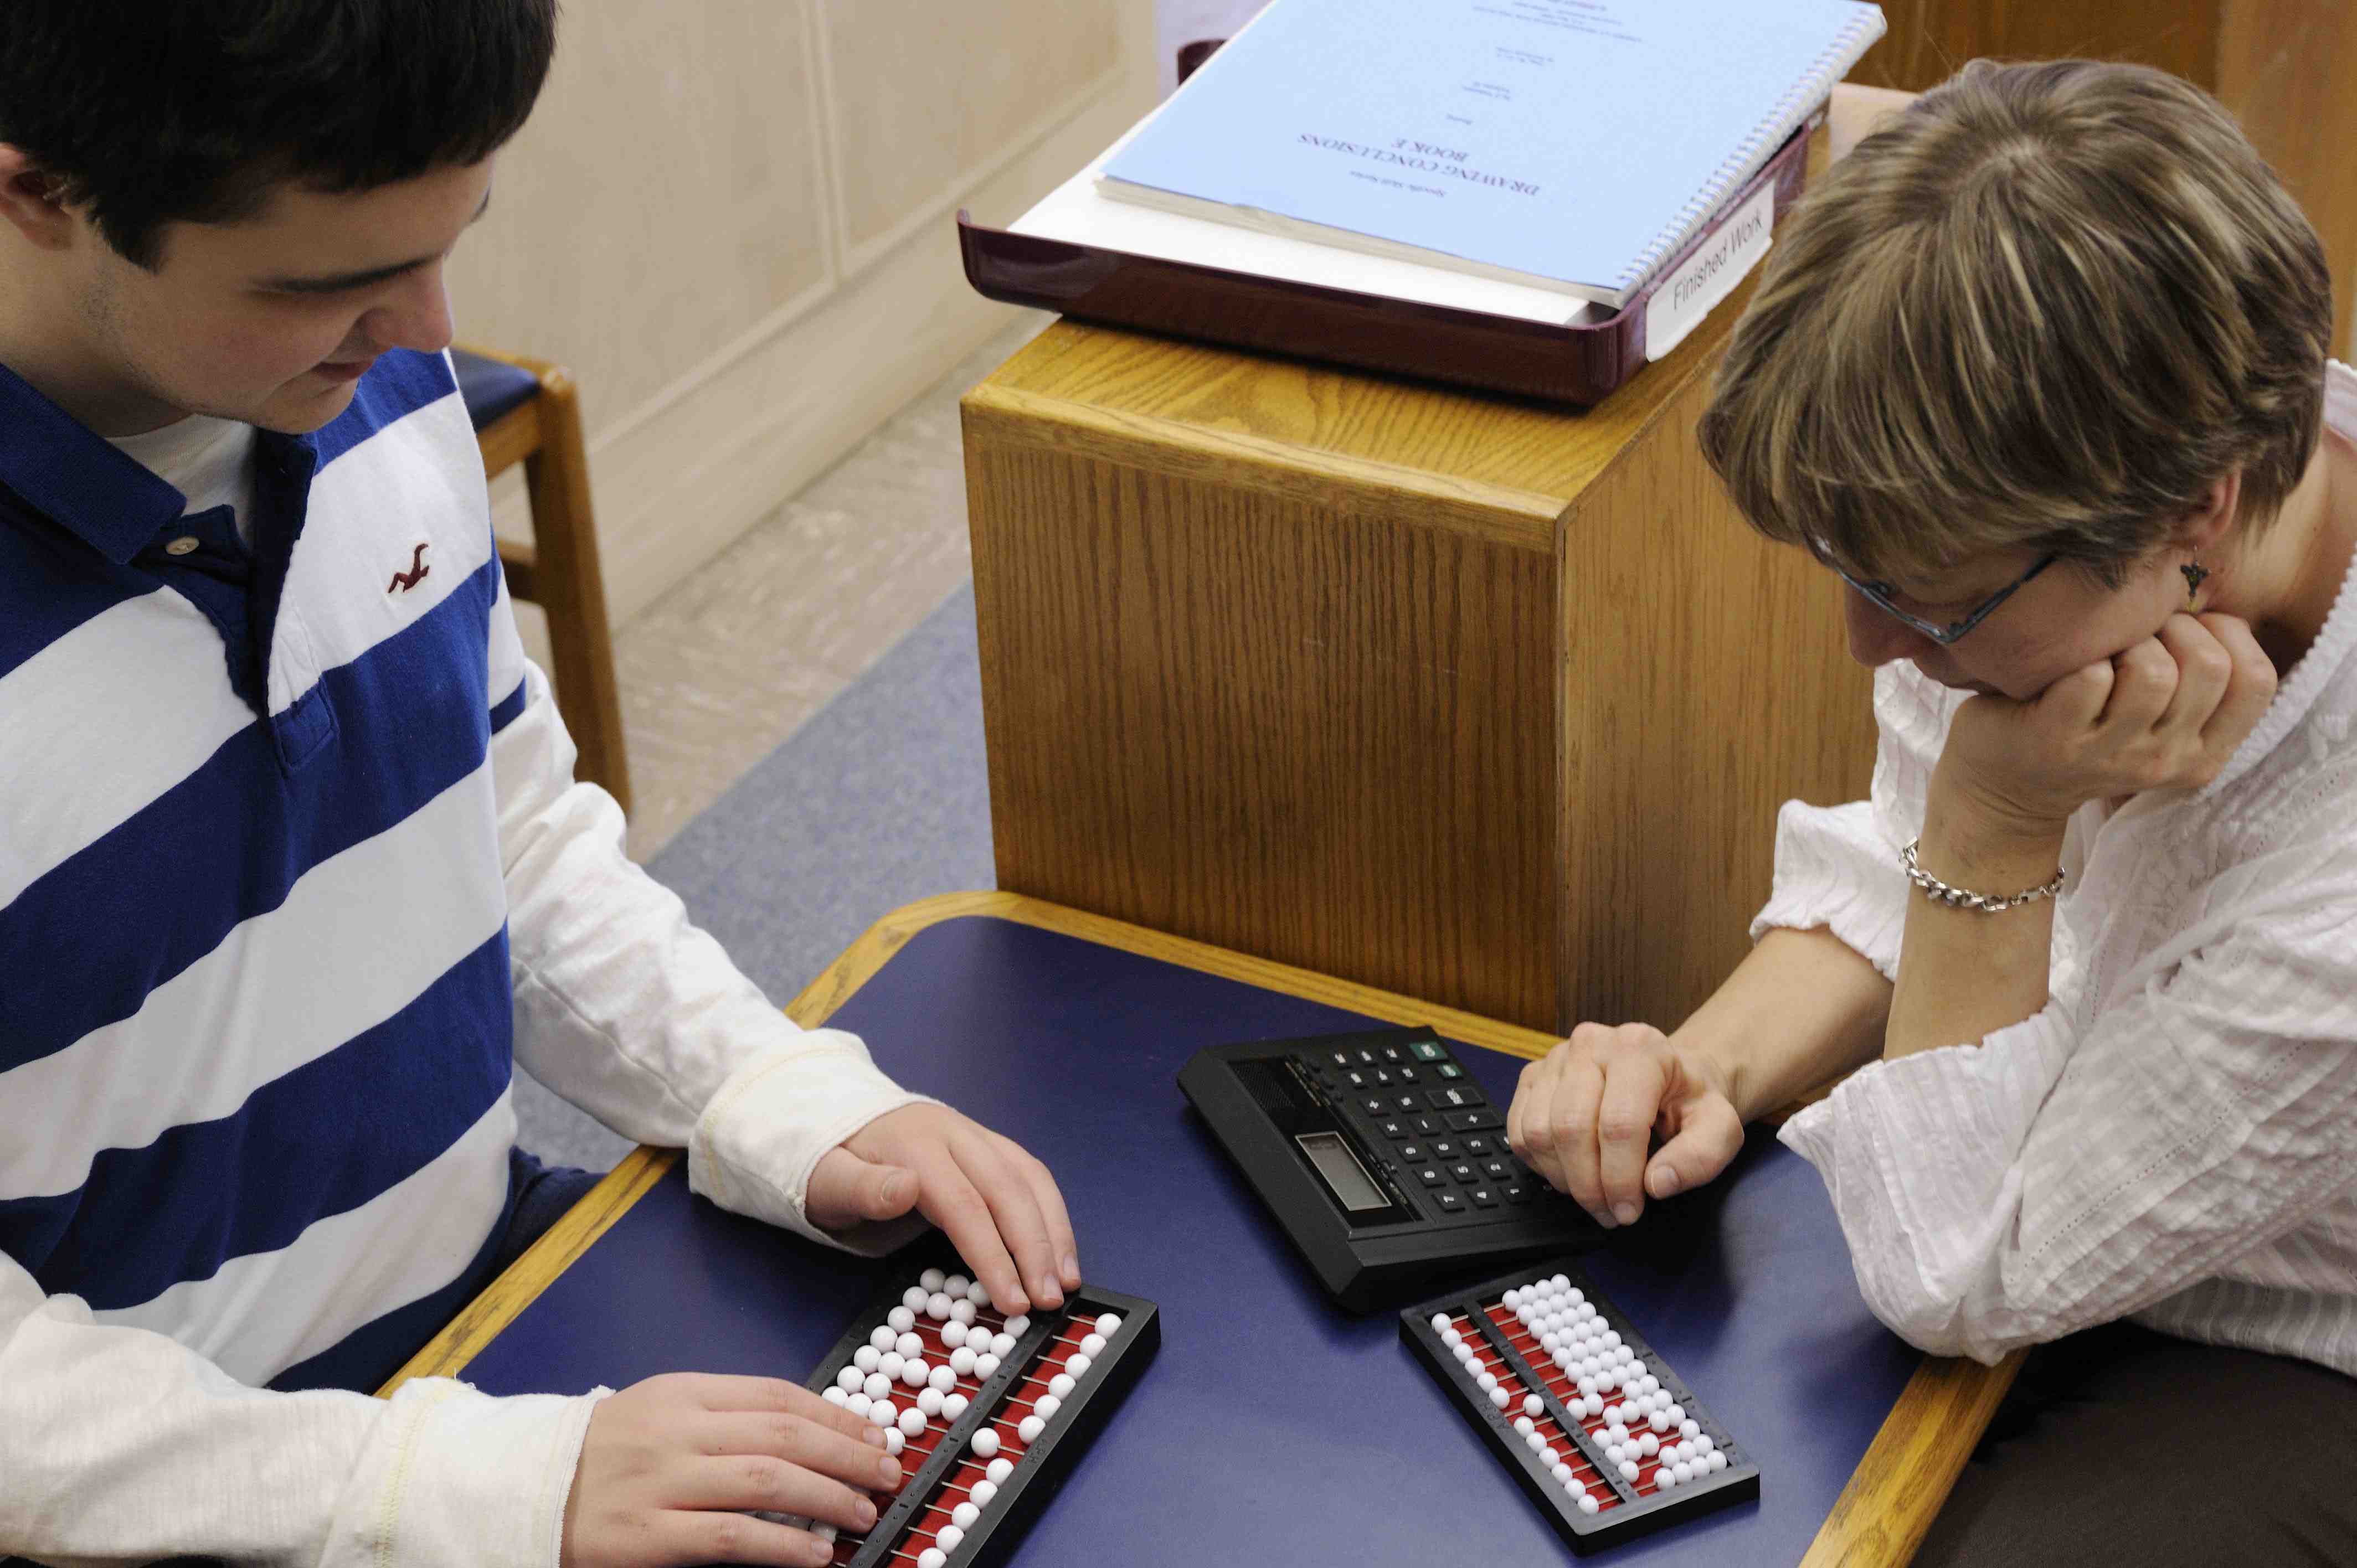 Student and teacher using abacus